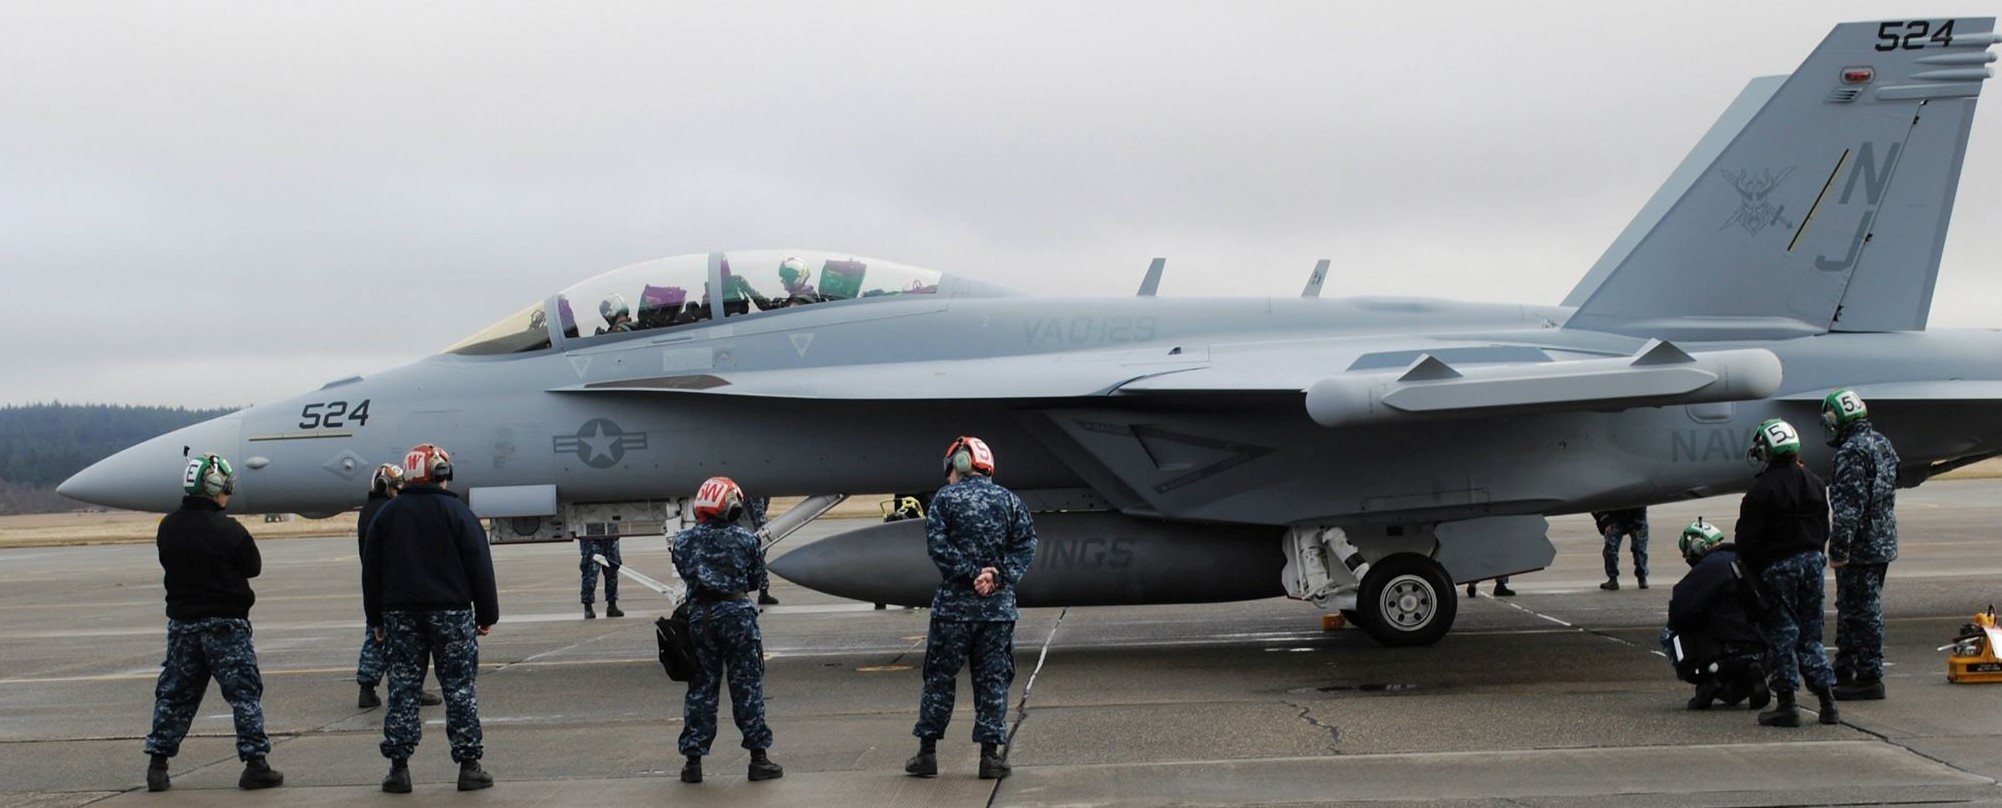 vaq-129 vikings electronic attack squadron fleet replacement frs us navy ea-18g growler 87